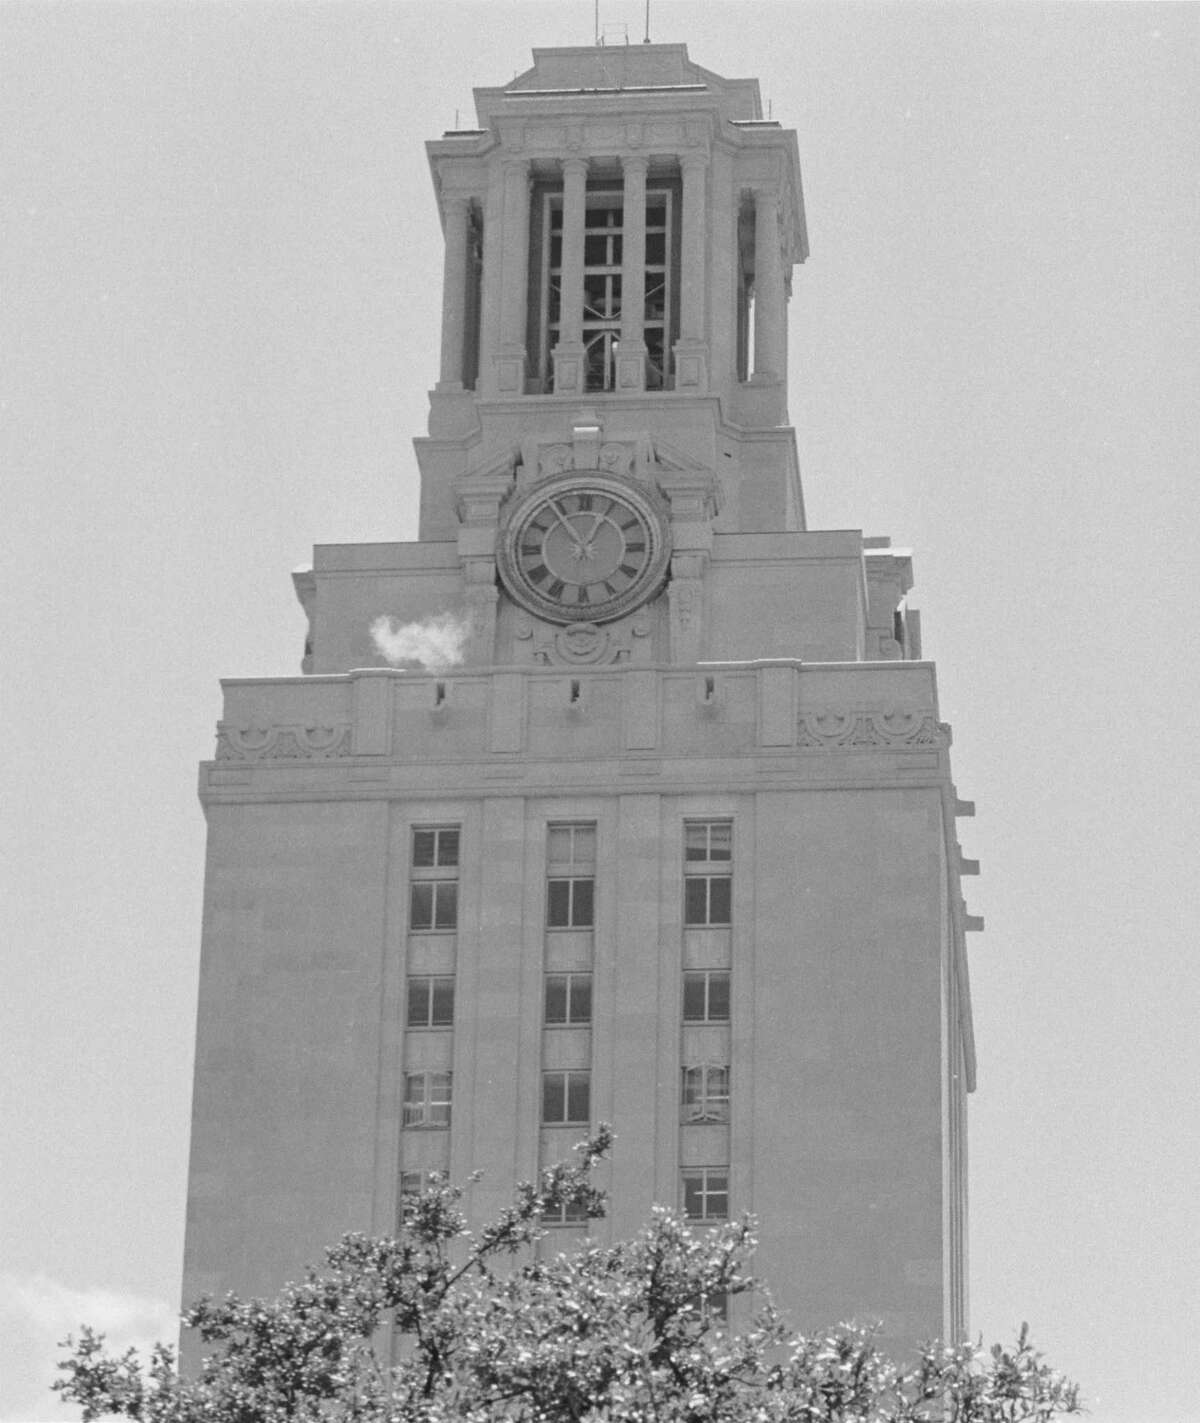 A puff of smoke is visible from the University of Texas Tower during a sniping siege on Aug. 1, 1966, by gunman Charles Whitman, who killed 17 people.